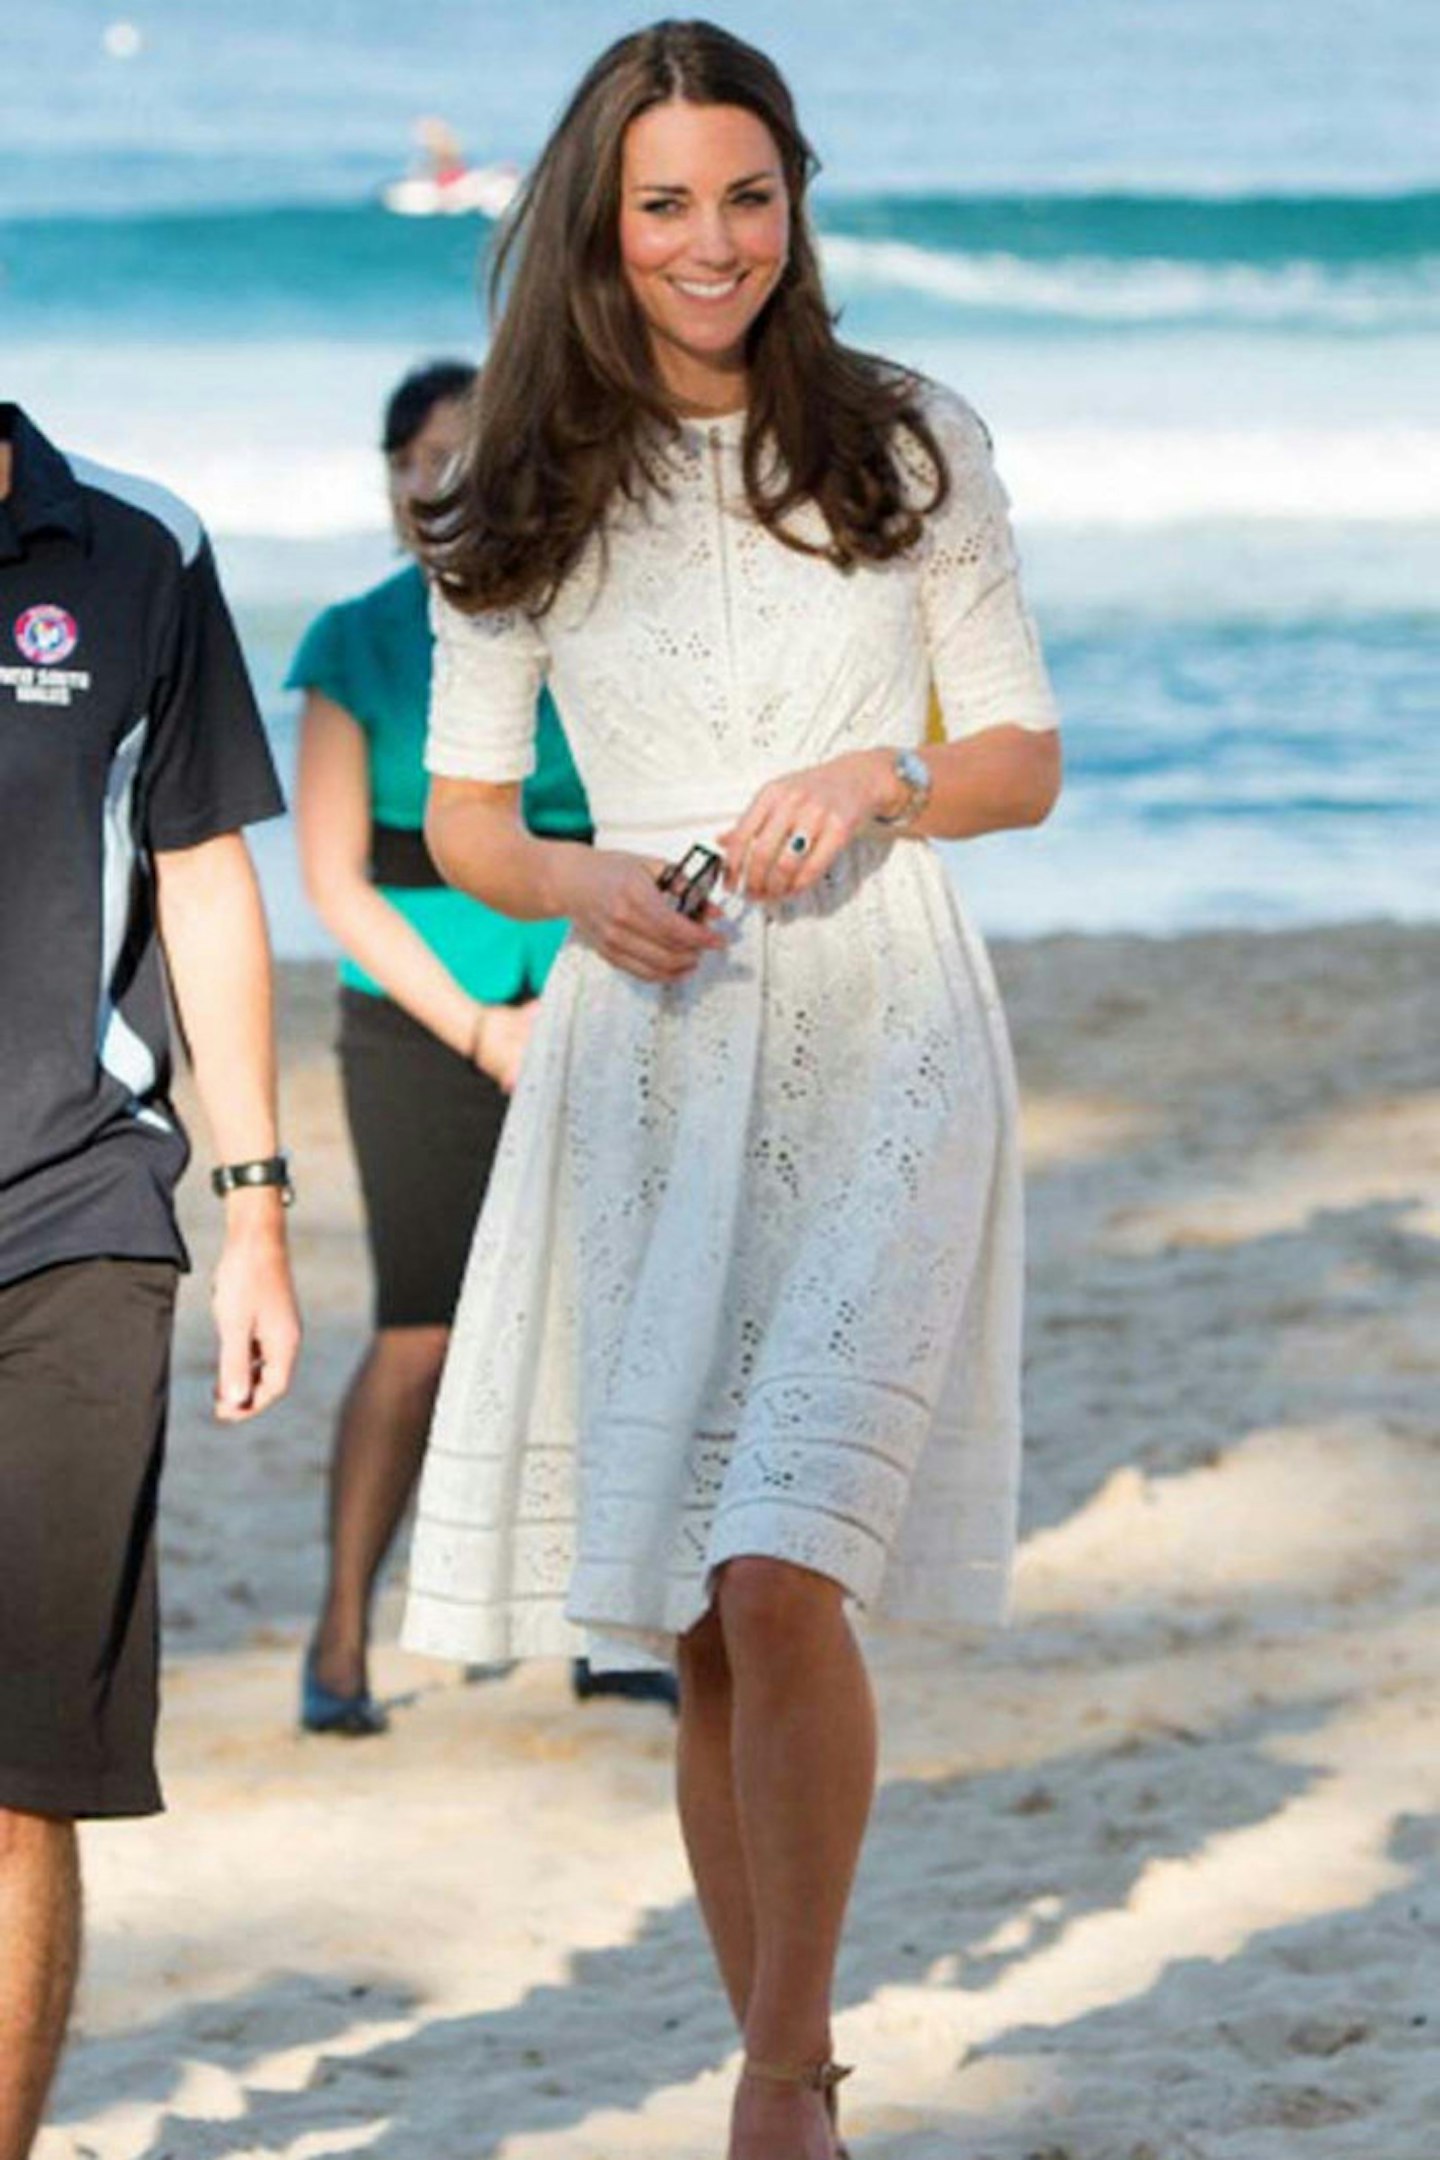 The Duchess of Cambridge in Zimmerman at Manley Beach, 20 April 2014